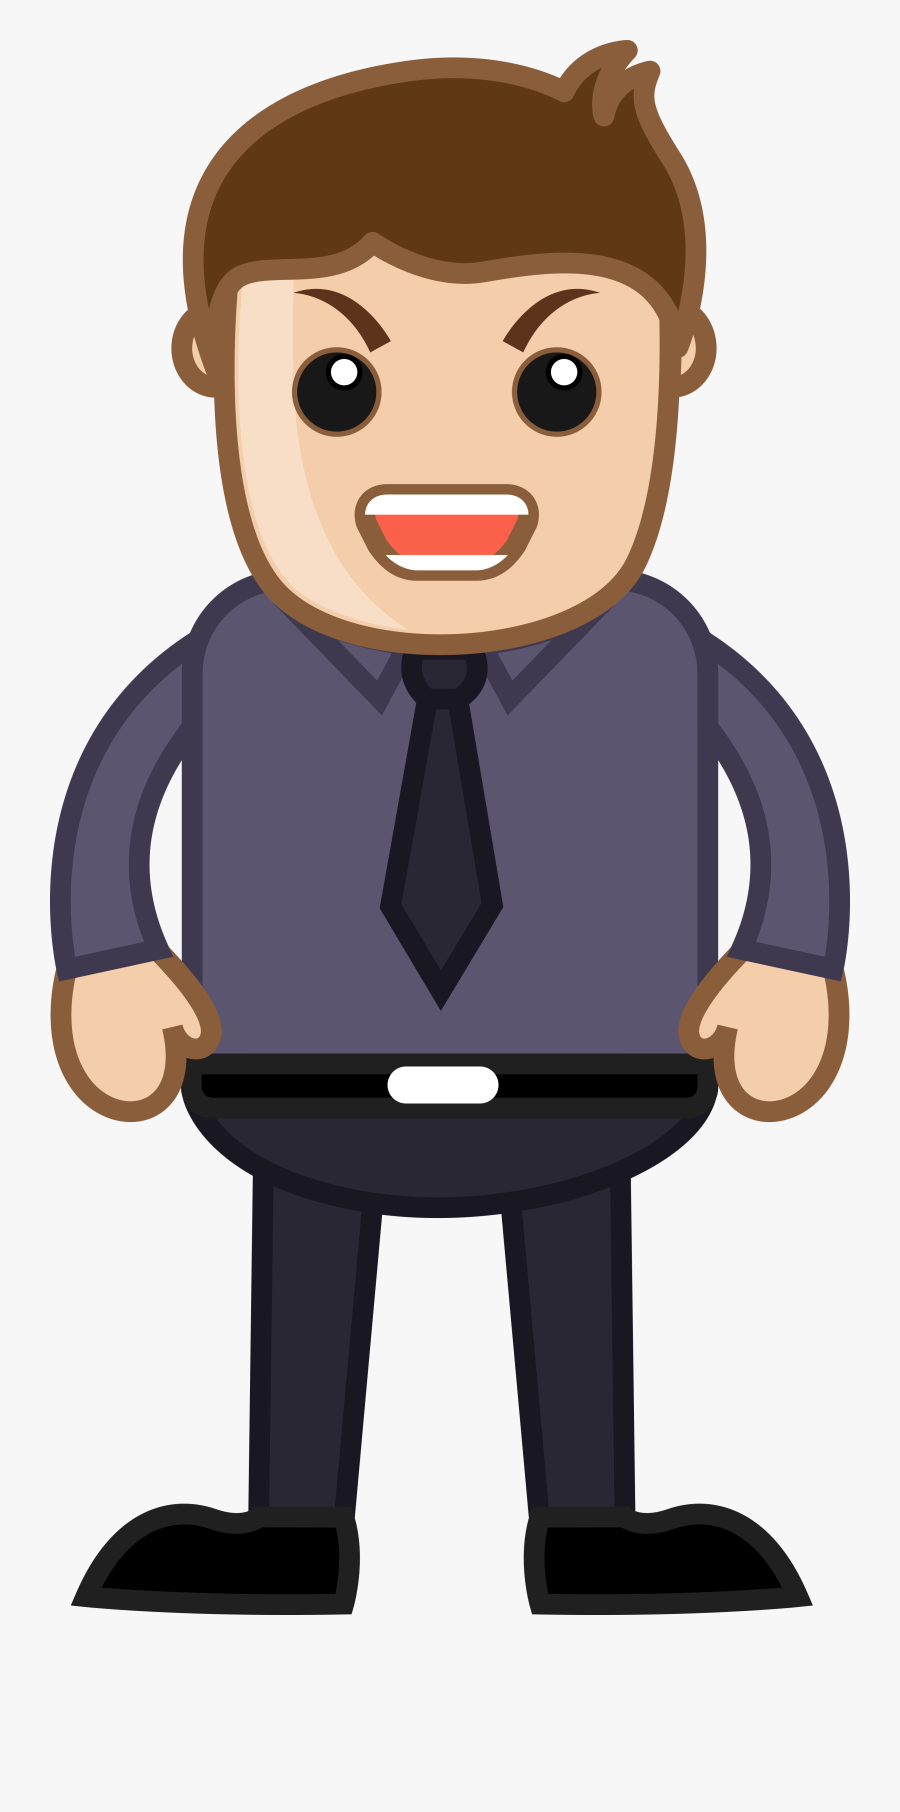 Transparent Angry Person Png - Cartoon People Angry, Transparent Clipart